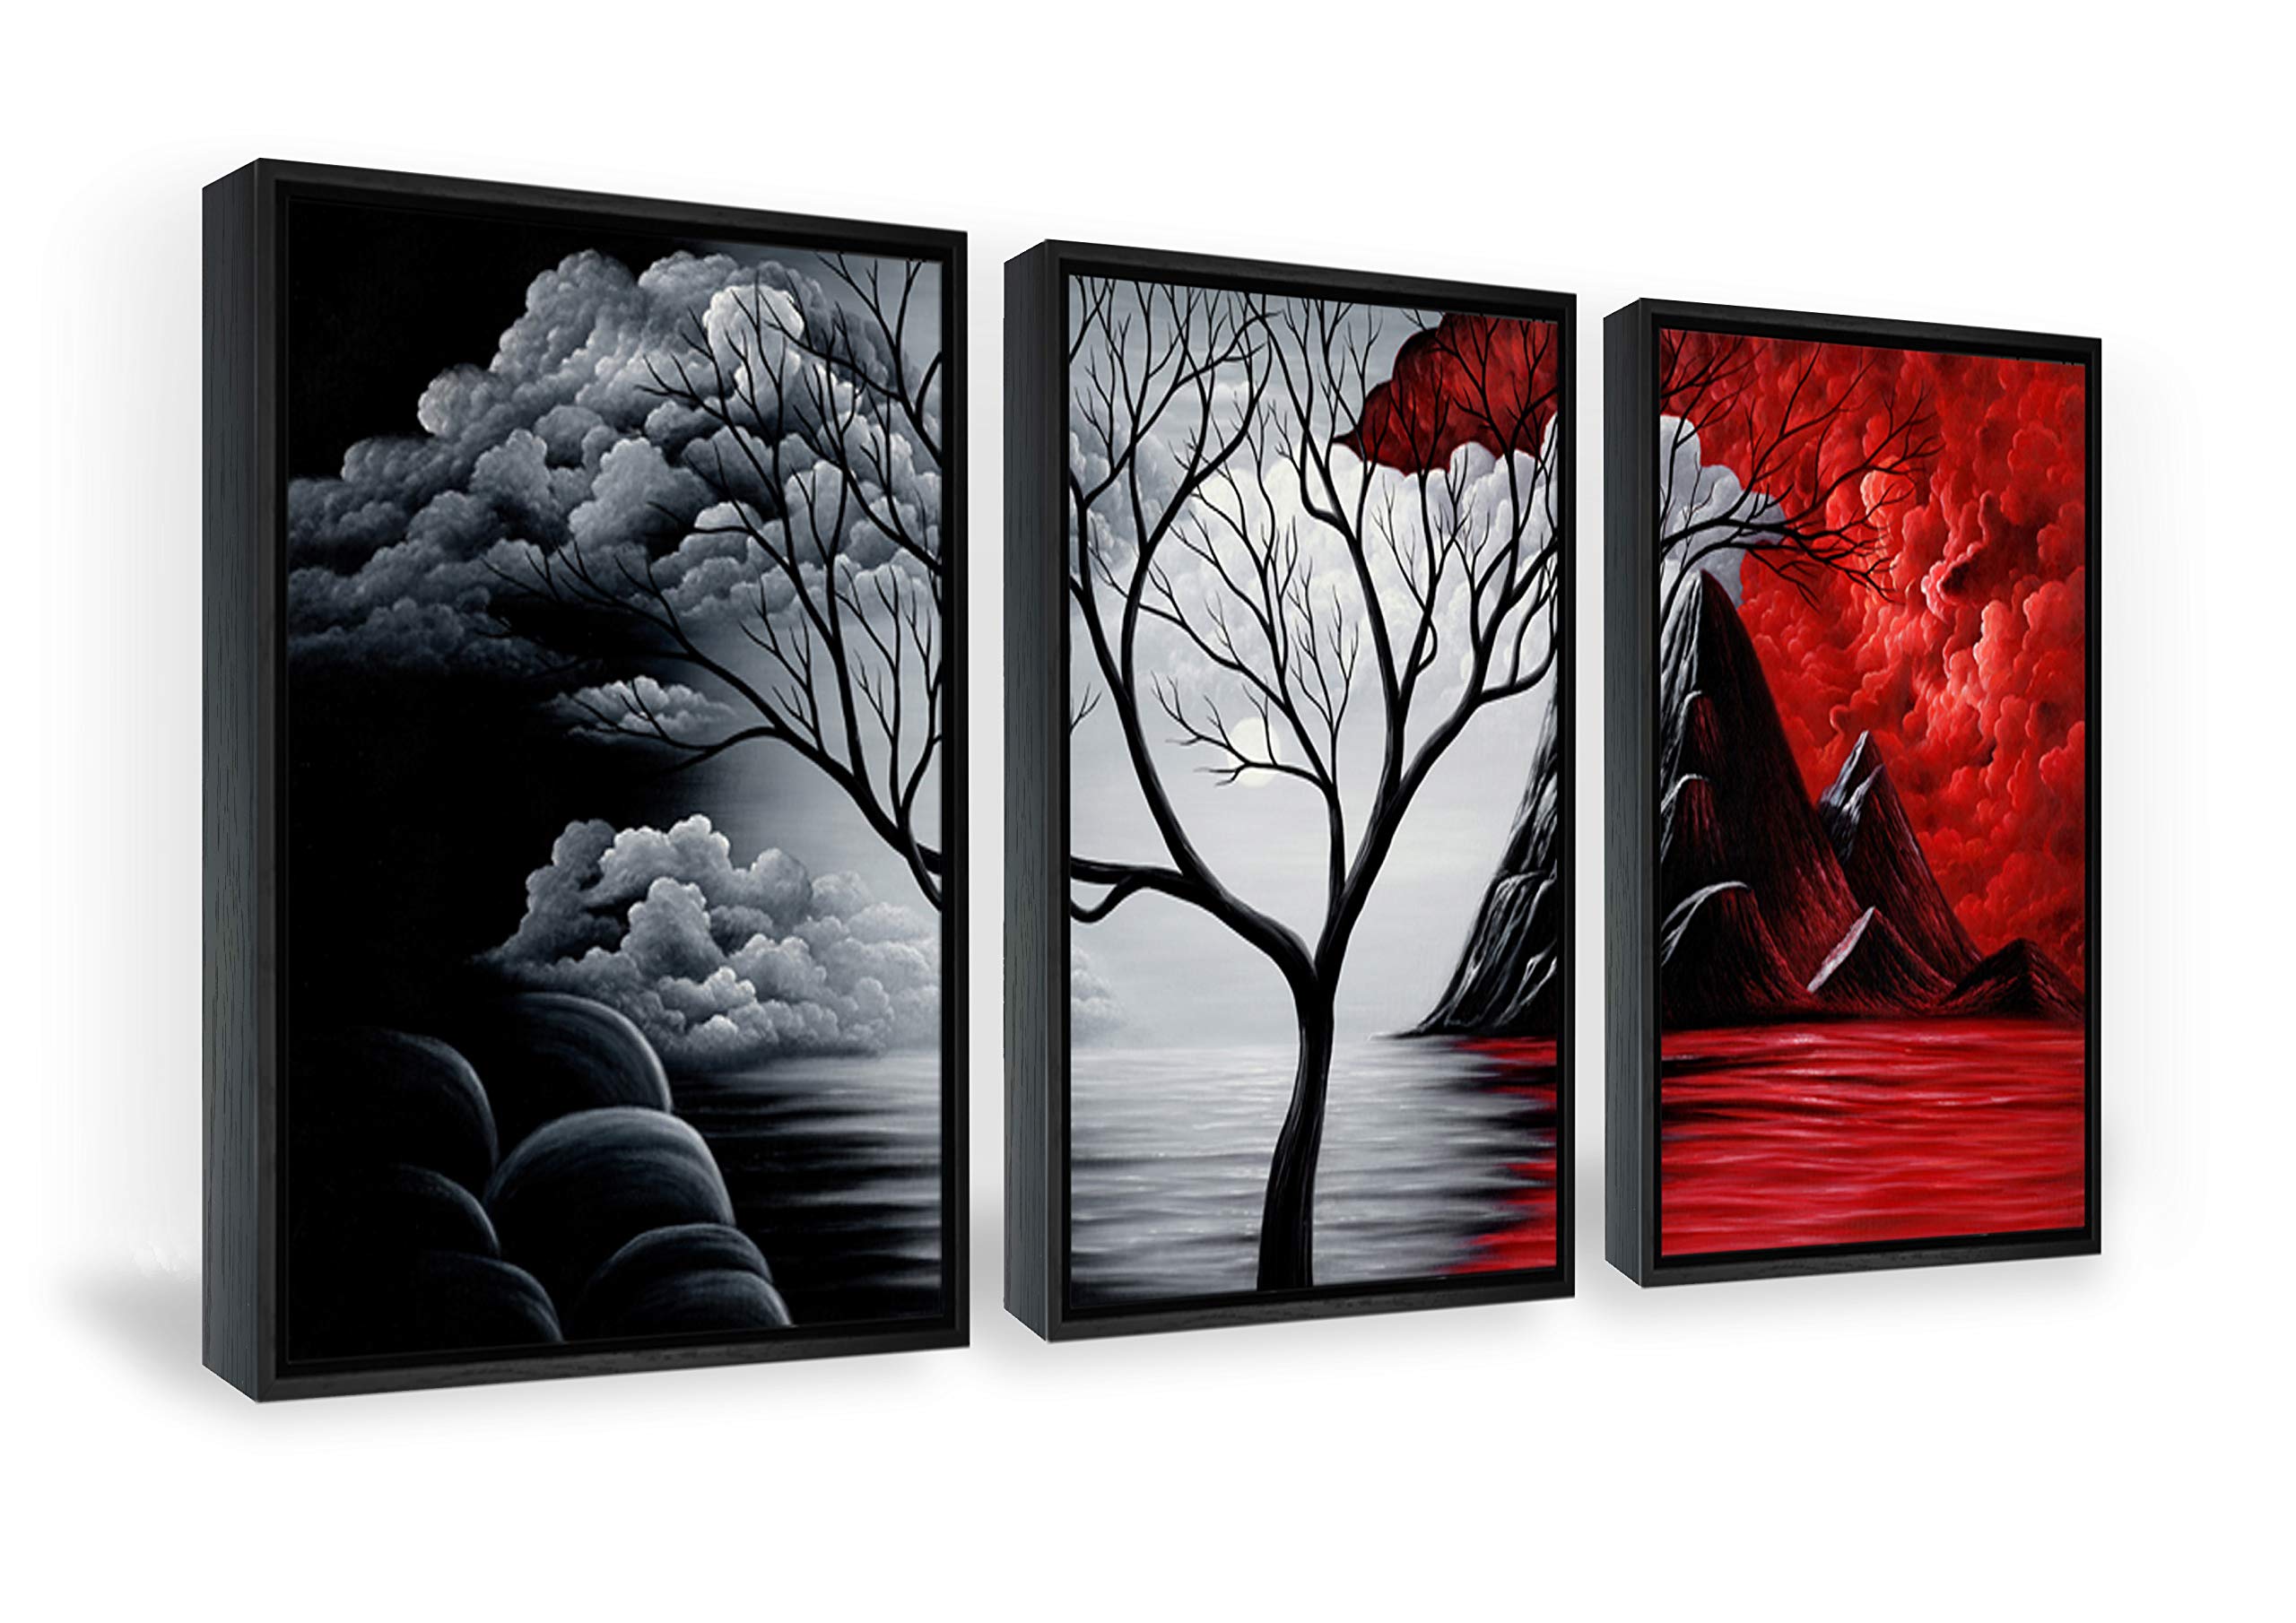 Wieco Art Framed Wall Art The Cloud Tree Wall Art HD Print of Oil Paintings Landscape Canvas Prints for Home Decorations, 3 Panels with Black Frames